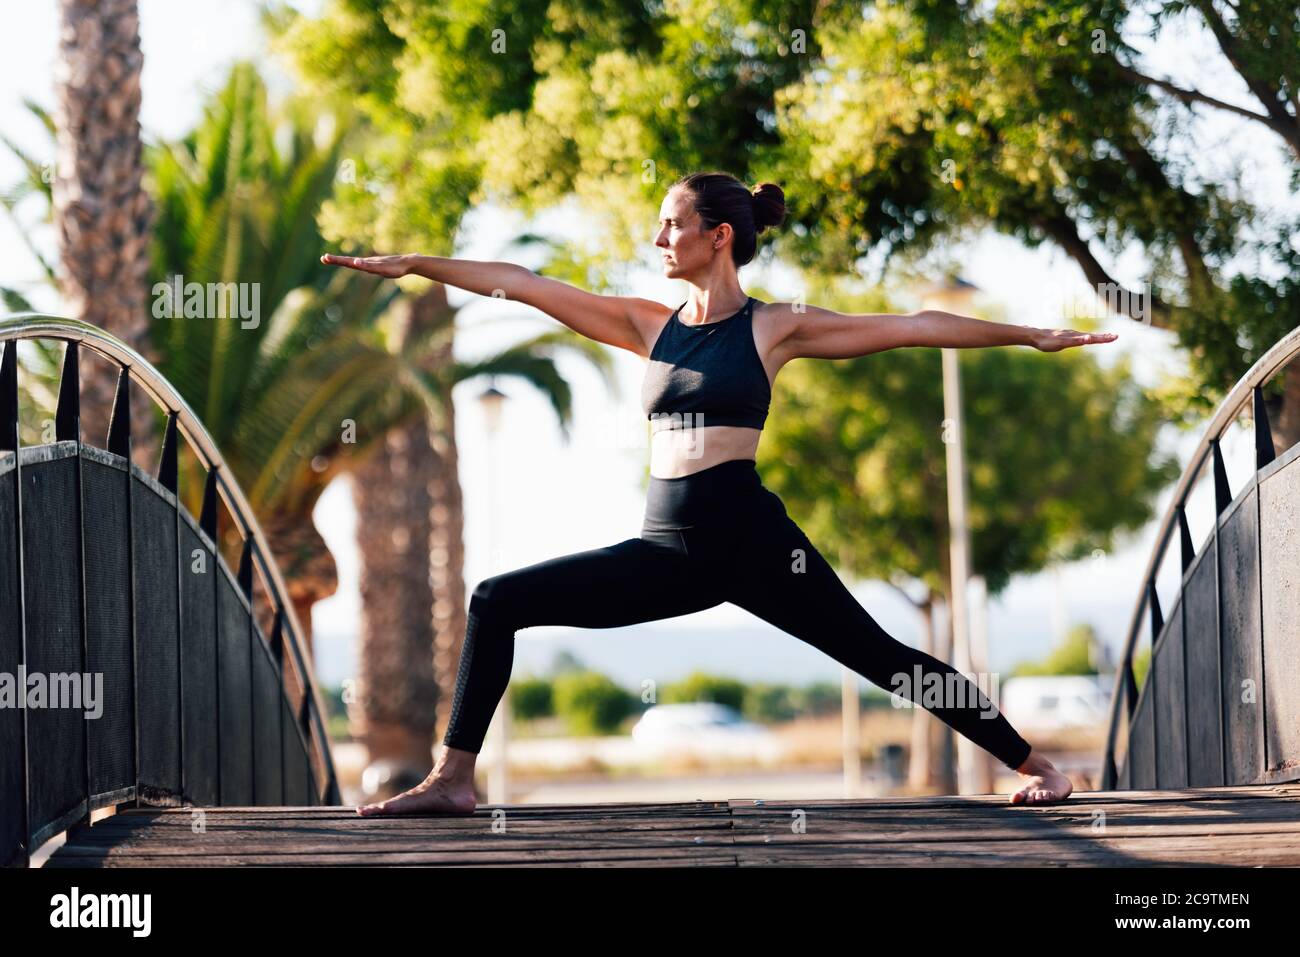 young woman doing exercises on outdoor copper wooden bridge surrounded by gardens Stock Photo